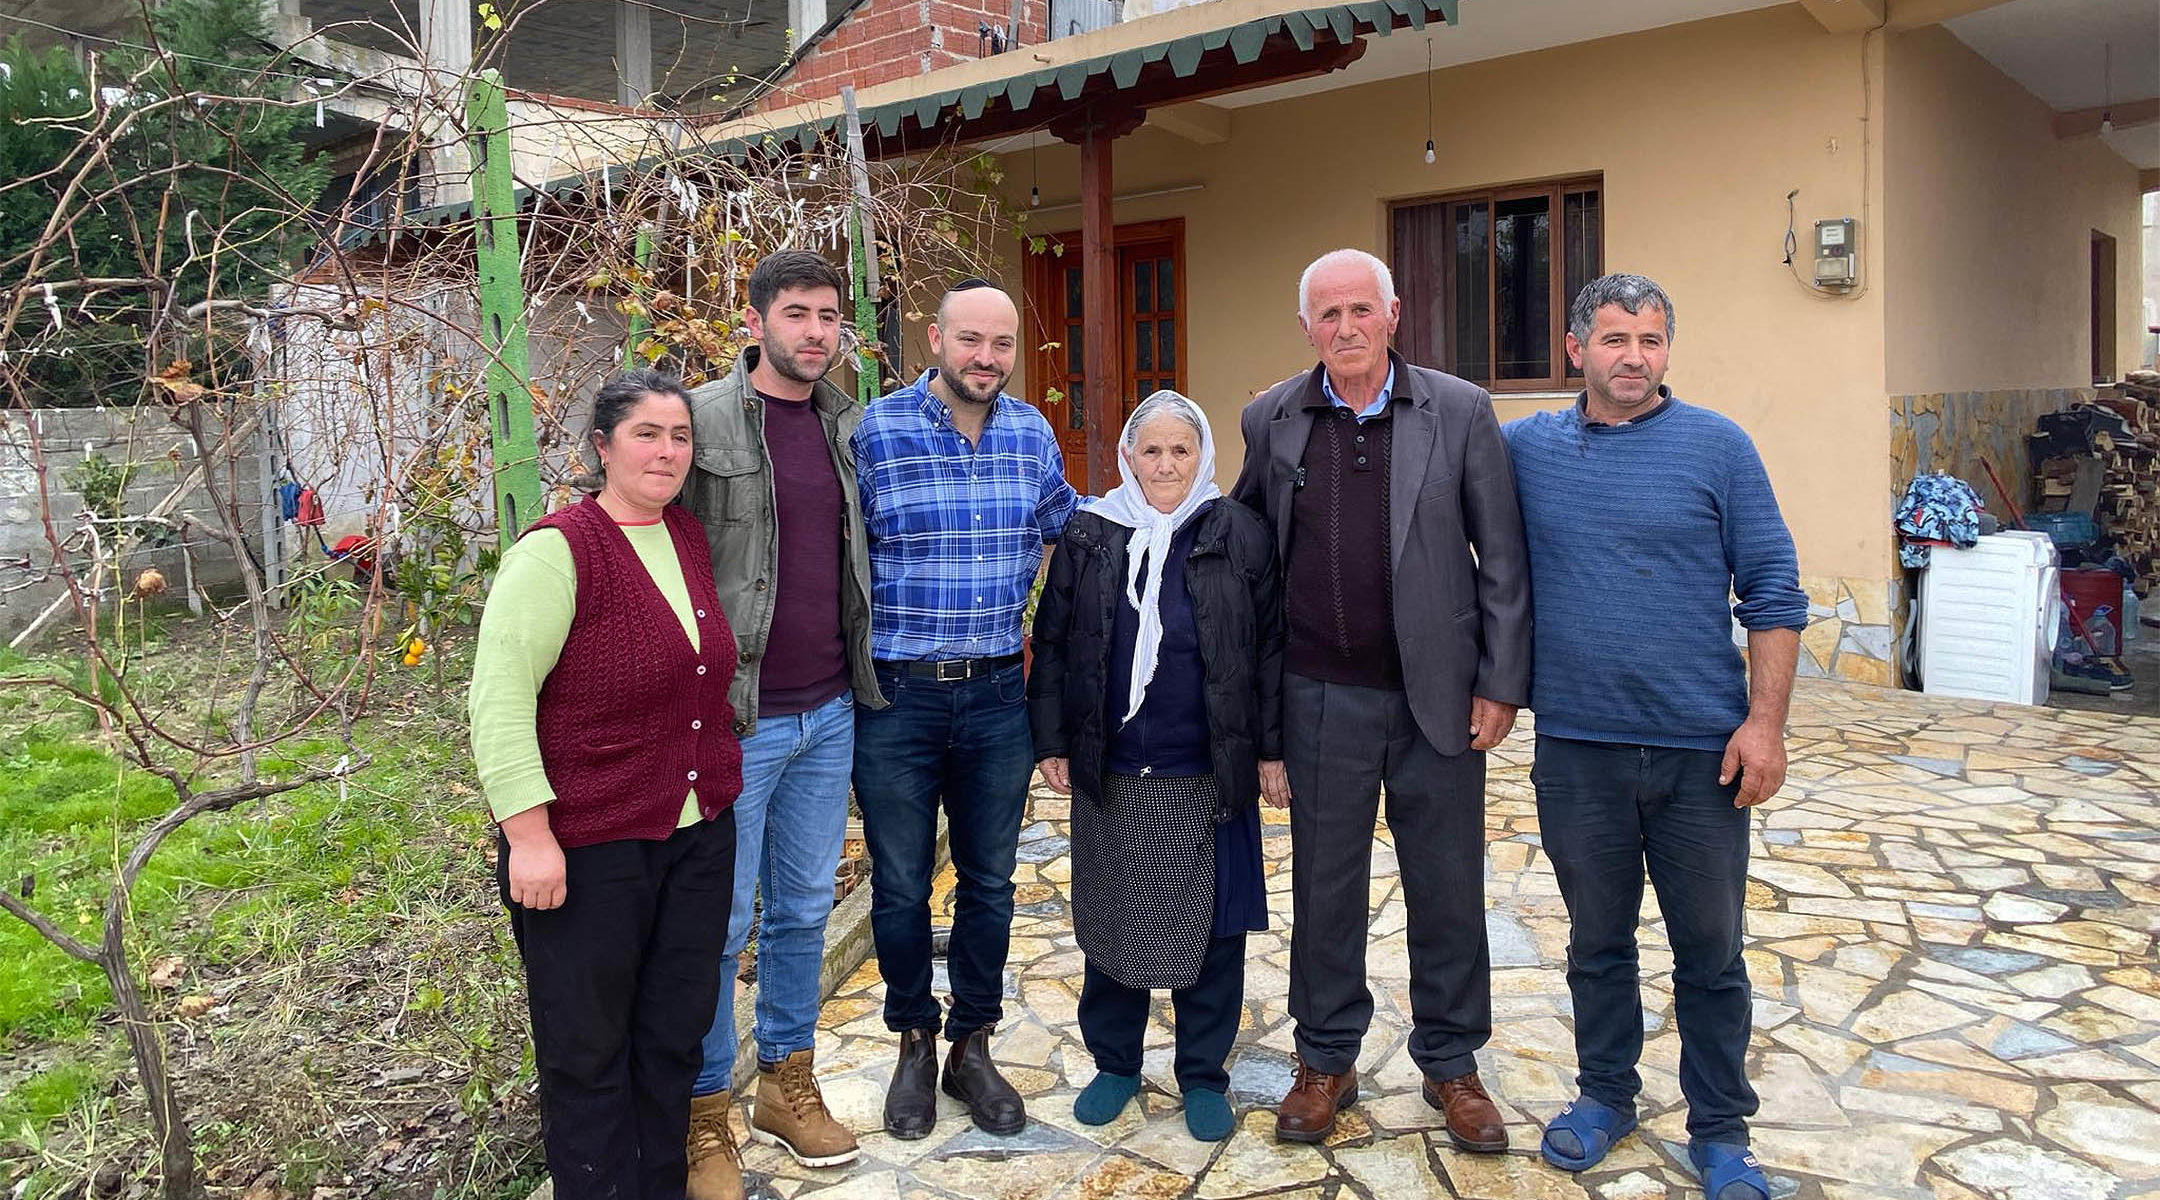 Jonny Daniels, third from left, with the Bicaku family in their home in Durres, Albania on Dec. 11, 2019. (Courtesy of From the Depths)